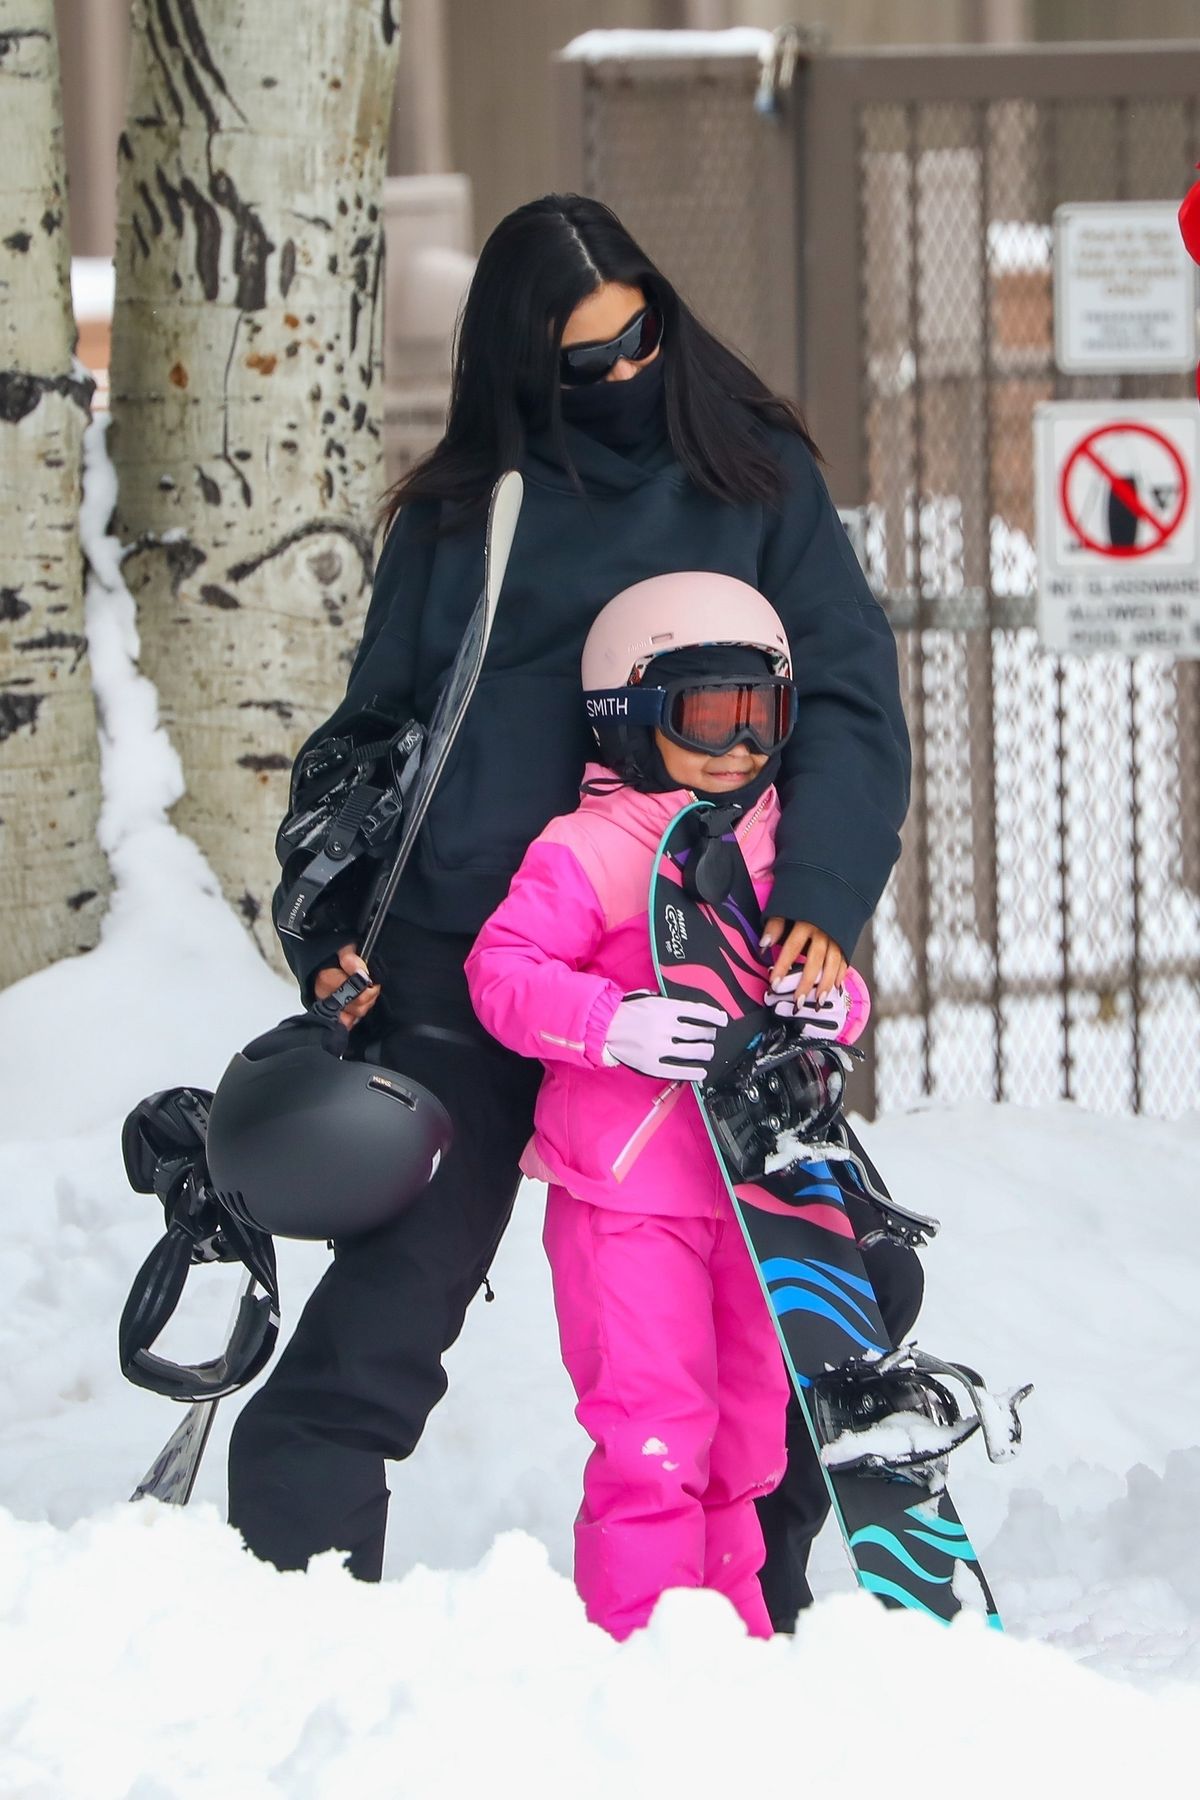 *EXCLUSIVE* Kylie Jenner goes snowboarding in Aspen